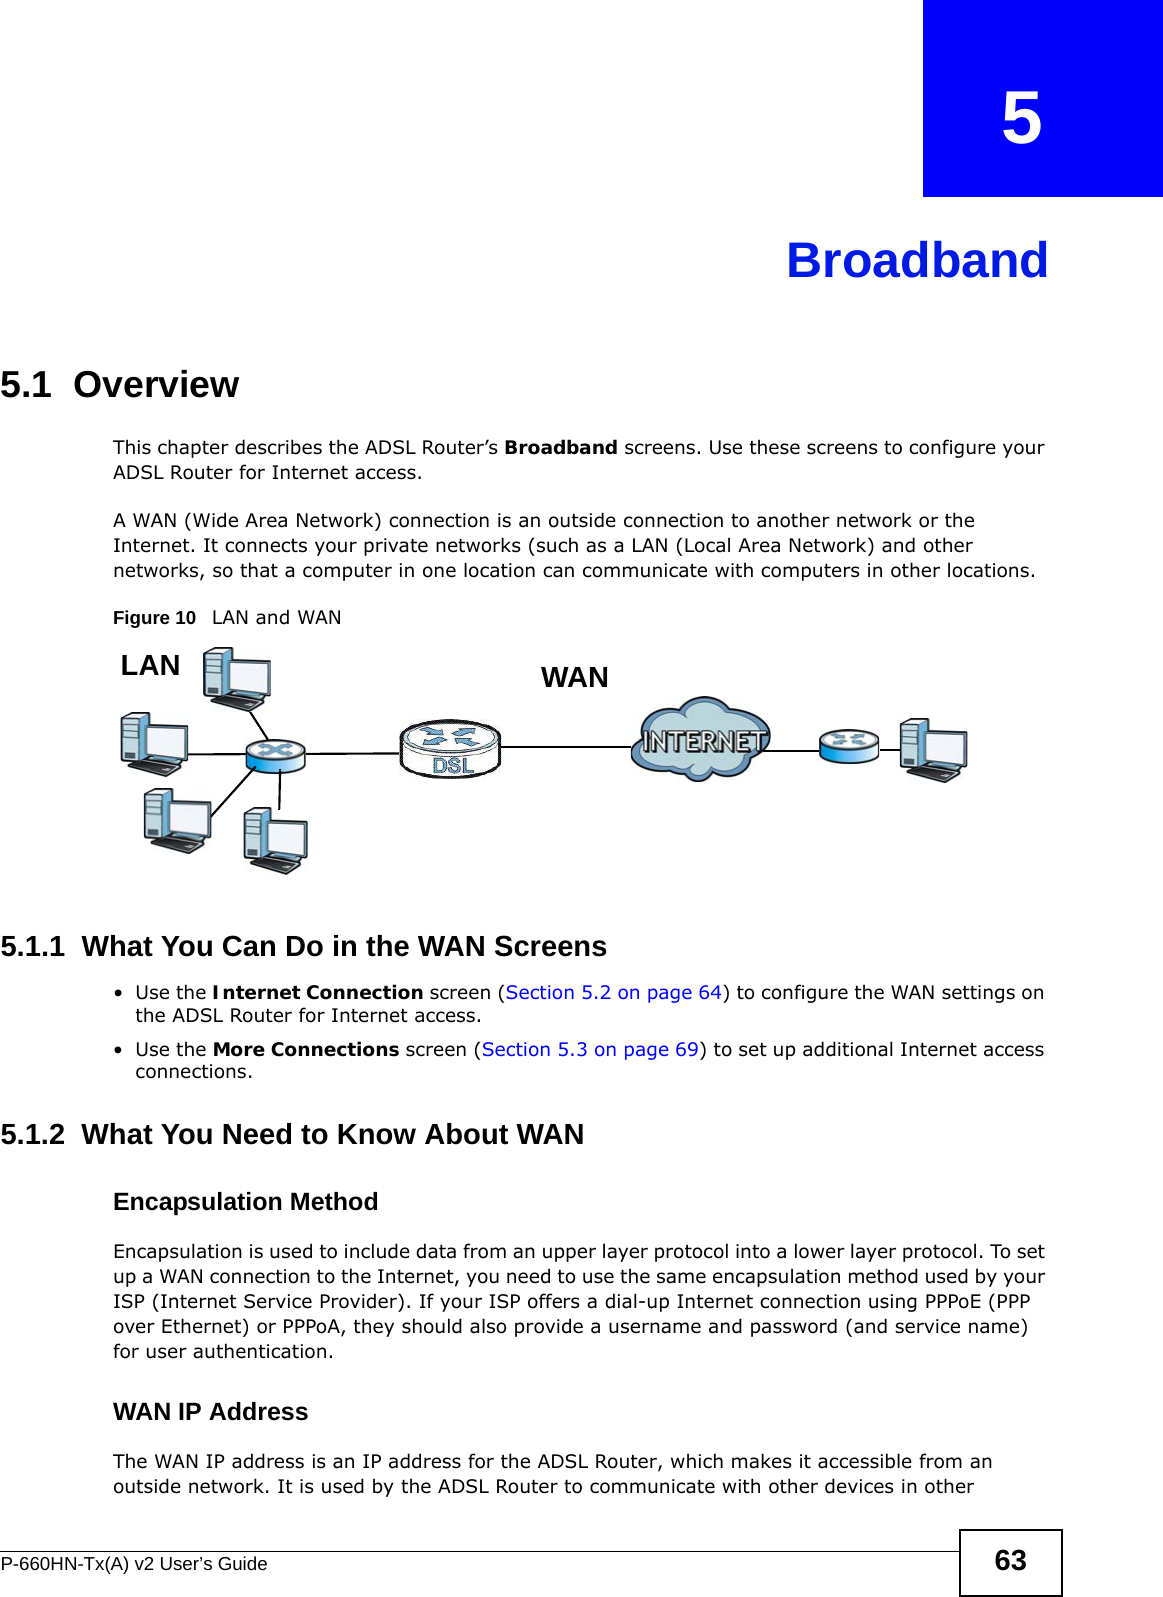 P-660HN-Tx(A) v2 User’s Guide 63CHAPTER   5Broadband5.1  OverviewThis chapter describes the ADSL Router’s Broadband screens. Use these screens to configure your ADSL Router for Internet access.A WAN (Wide Area Network) connection is an outside connection to another network or the Internet. It connects your private networks (such as a LAN (Local Area Network) and other networks, so that a computer in one location can communicate with computers in other locations.Figure 10   LAN and WAN5.1.1  What You Can Do in the WAN Screens•Use the Internet Connection screen (Section 5.2 on page 64) to configure the WAN settings on the ADSL Router for Internet access.•Use the More Connections screen (Section 5.3 on page 69) to set up additional Internet access connections.5.1.2  What You Need to Know About WANEncapsulation MethodEncapsulation is used to include data from an upper layer protocol into a lower layer protocol. To set up a WAN connection to the Internet, you need to use the same encapsulation method used by your ISP (Internet Service Provider). If your ISP offers a dial-up Internet connection using PPPoE (PPP over Ethernet) or PPPoA, they should also provide a username and password (and service name) for user authentication.WAN IP AddressThe WAN IP address is an IP address for the ADSL Router, which makes it accessible from an outside network. It is used by the ADSL Router to communicate with other devices in other WANLAN